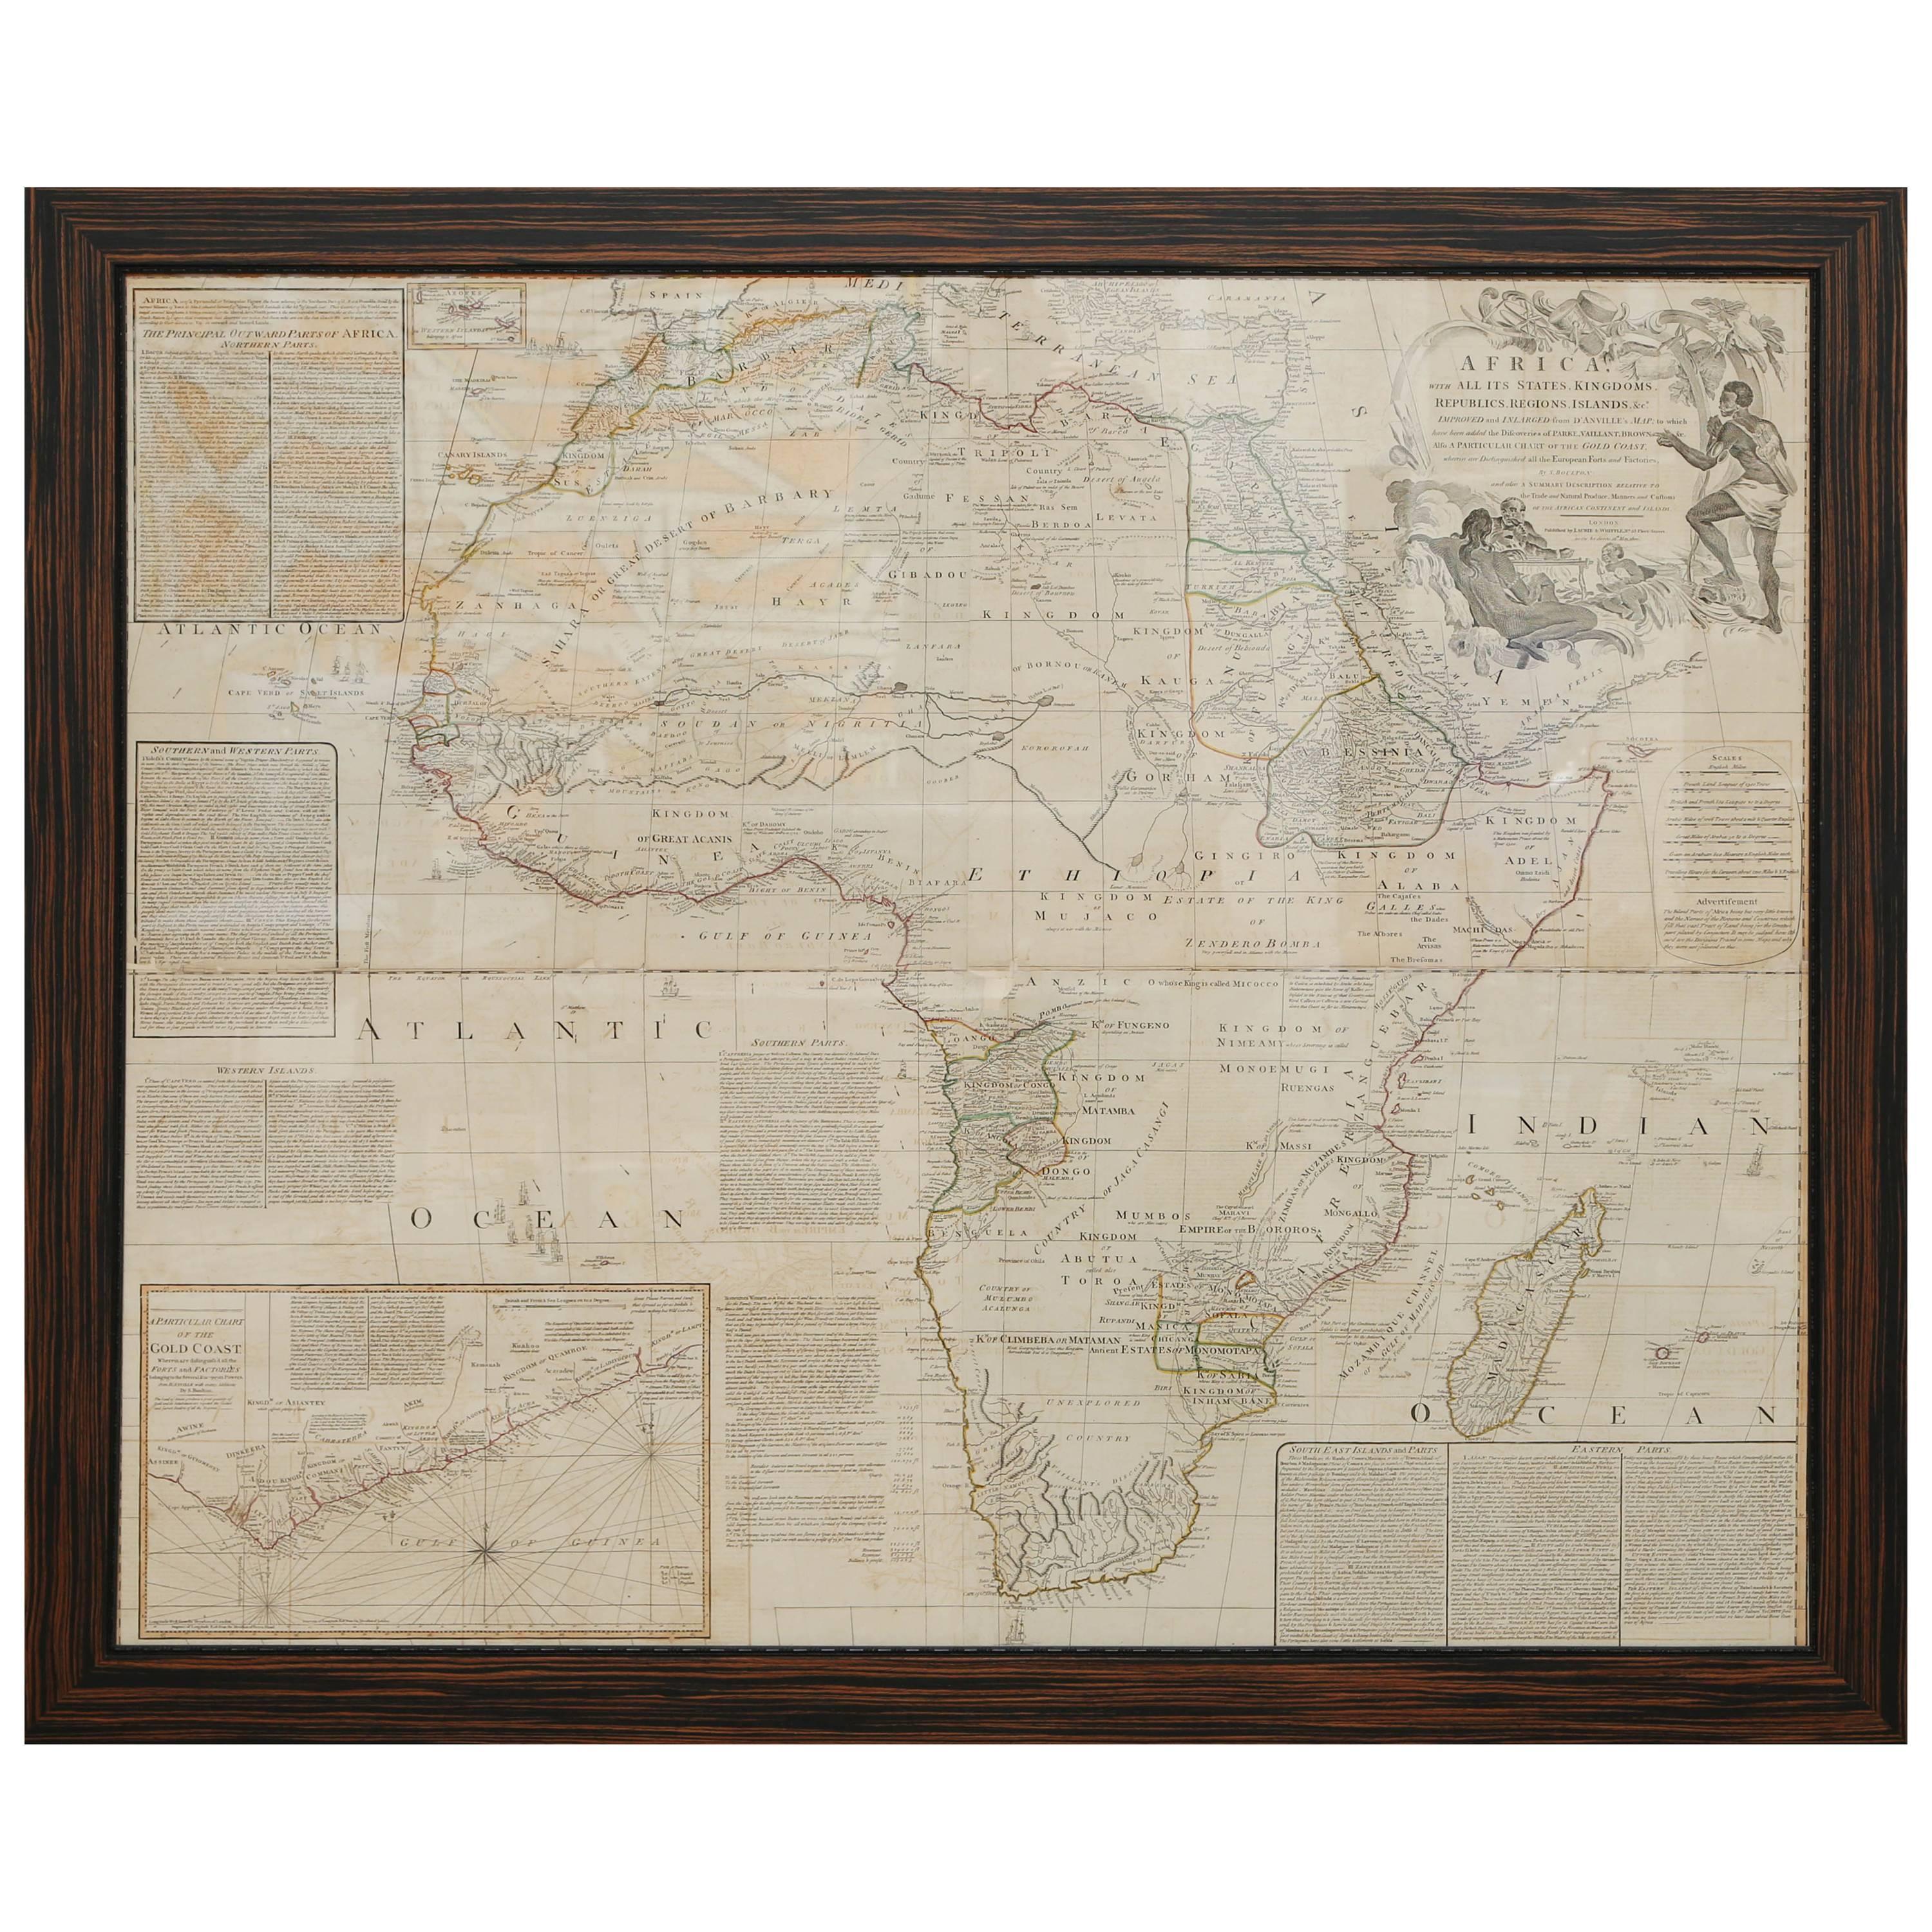 Rare Engraved Map of Africa by Samuel Boulton, 1800